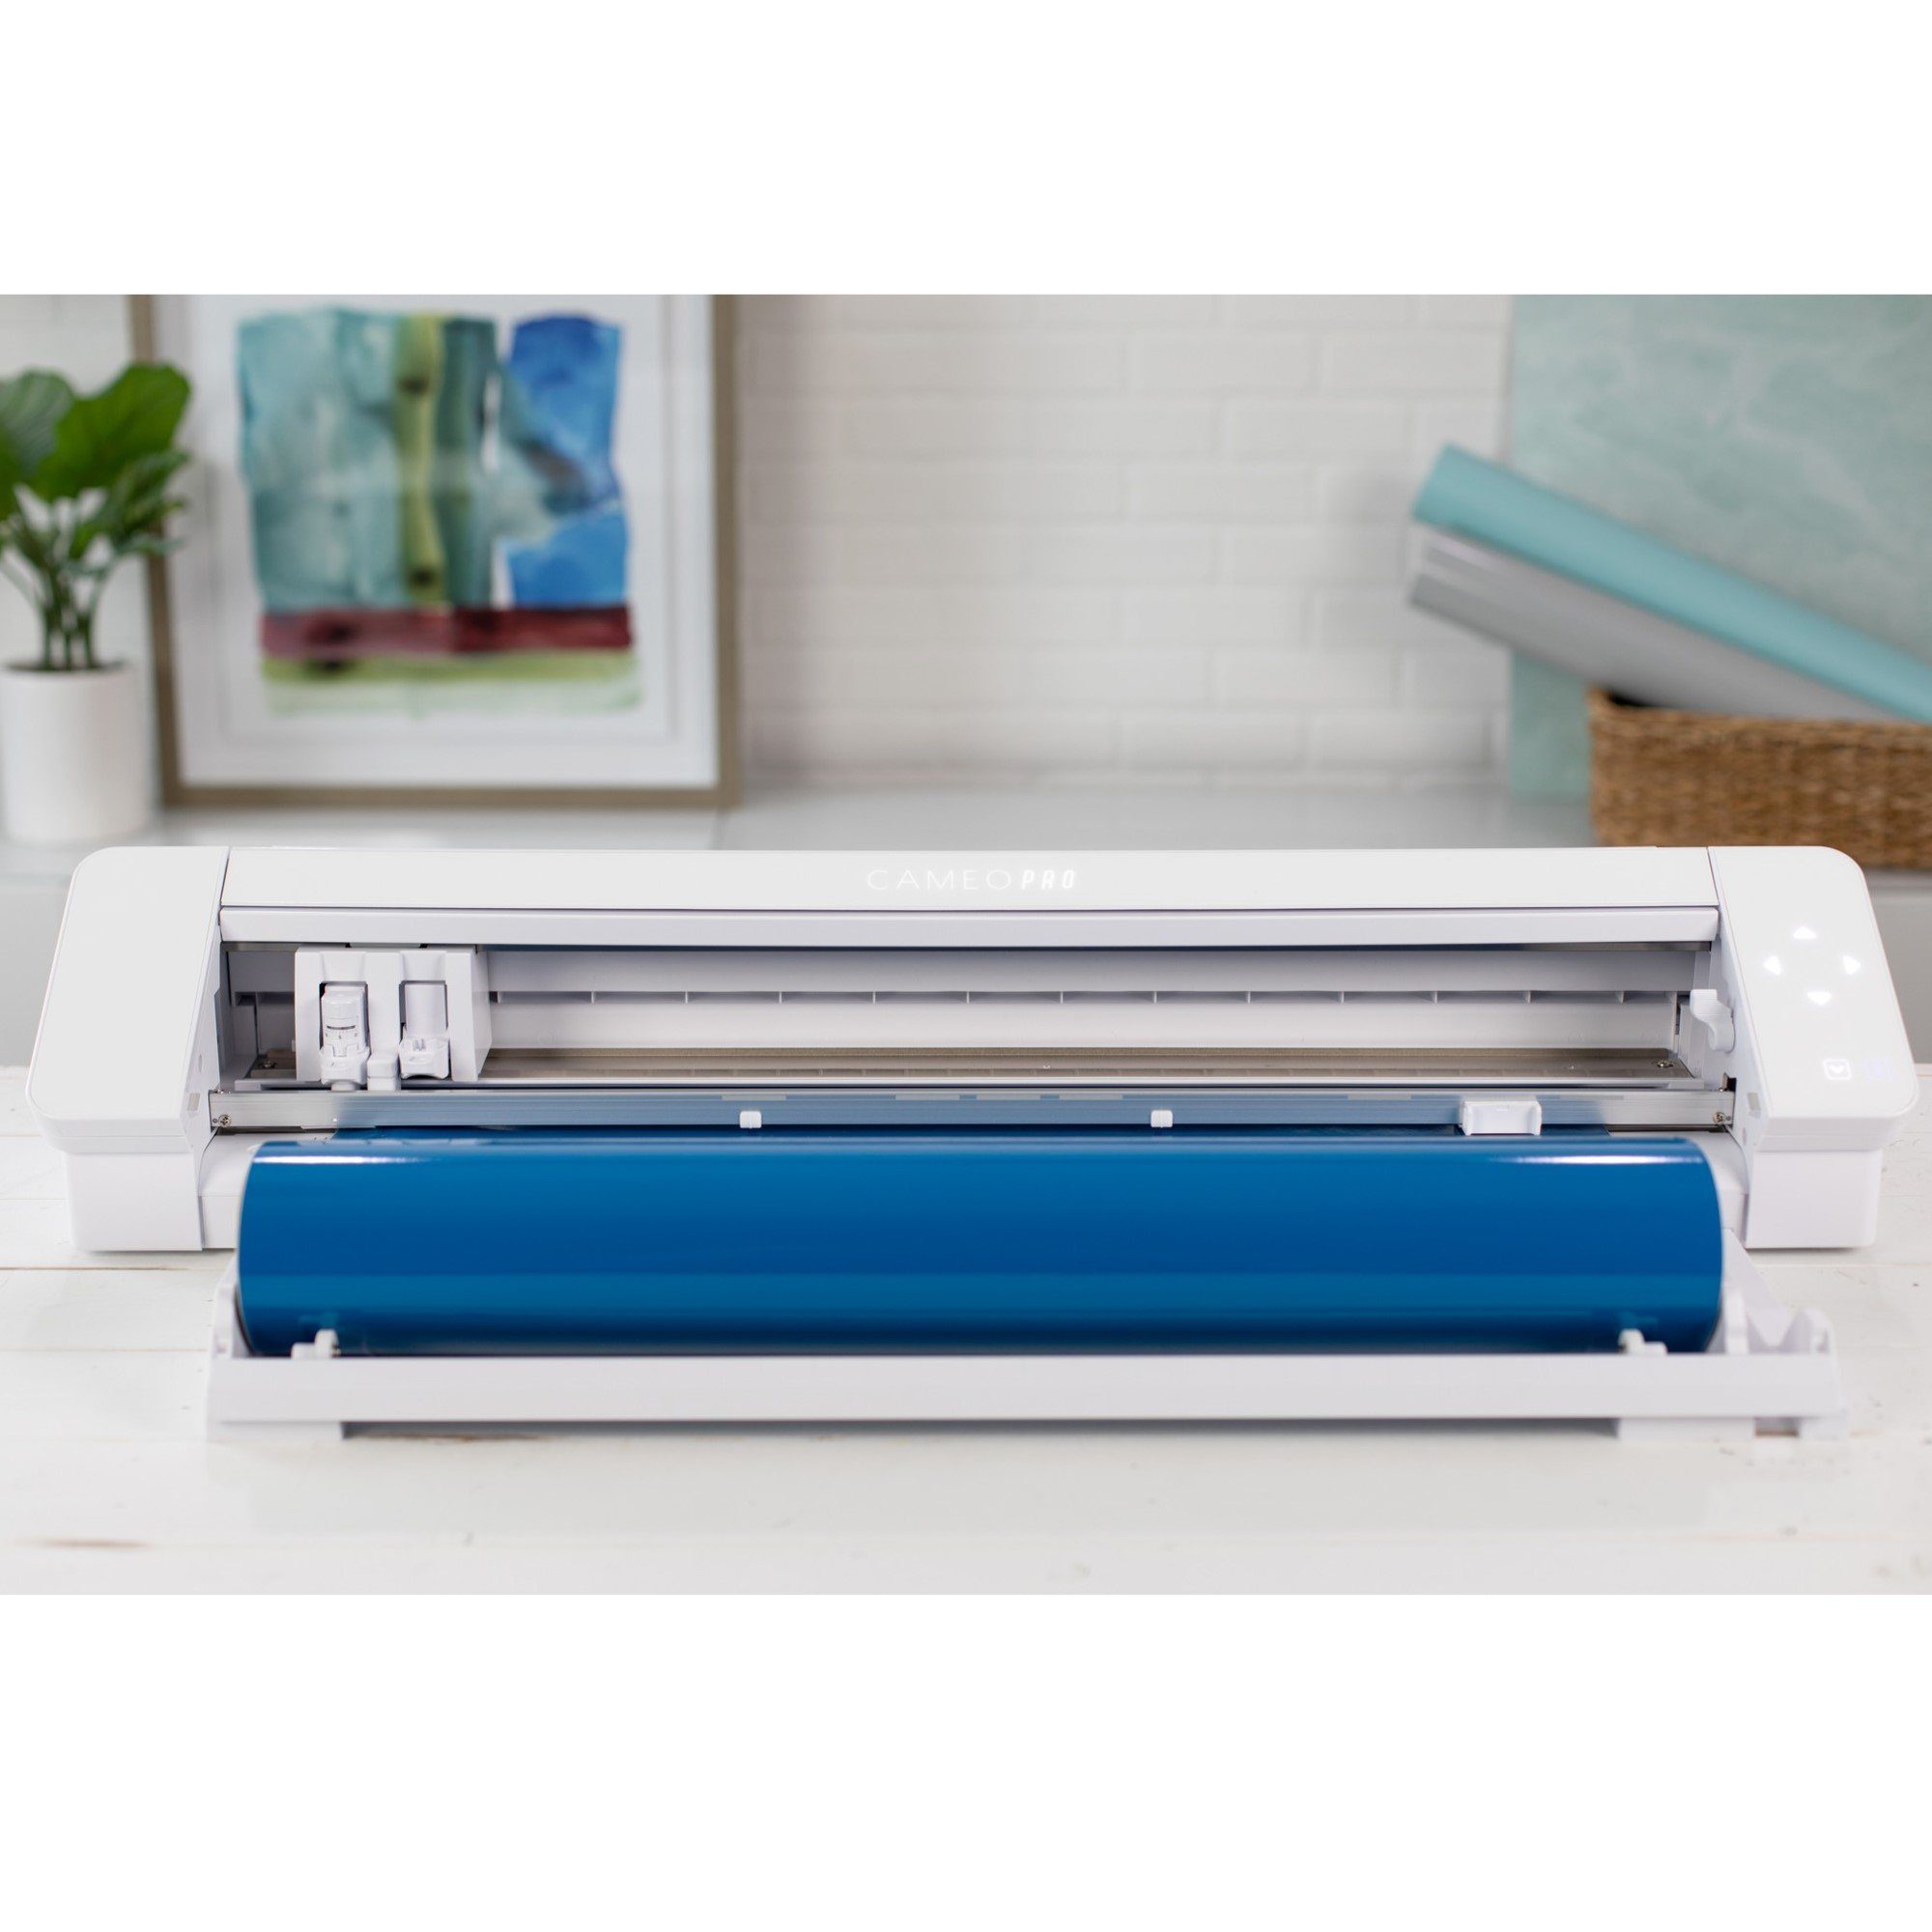 silhouette cameo 4 pro 24” cutting machine with mats - brand new in the box